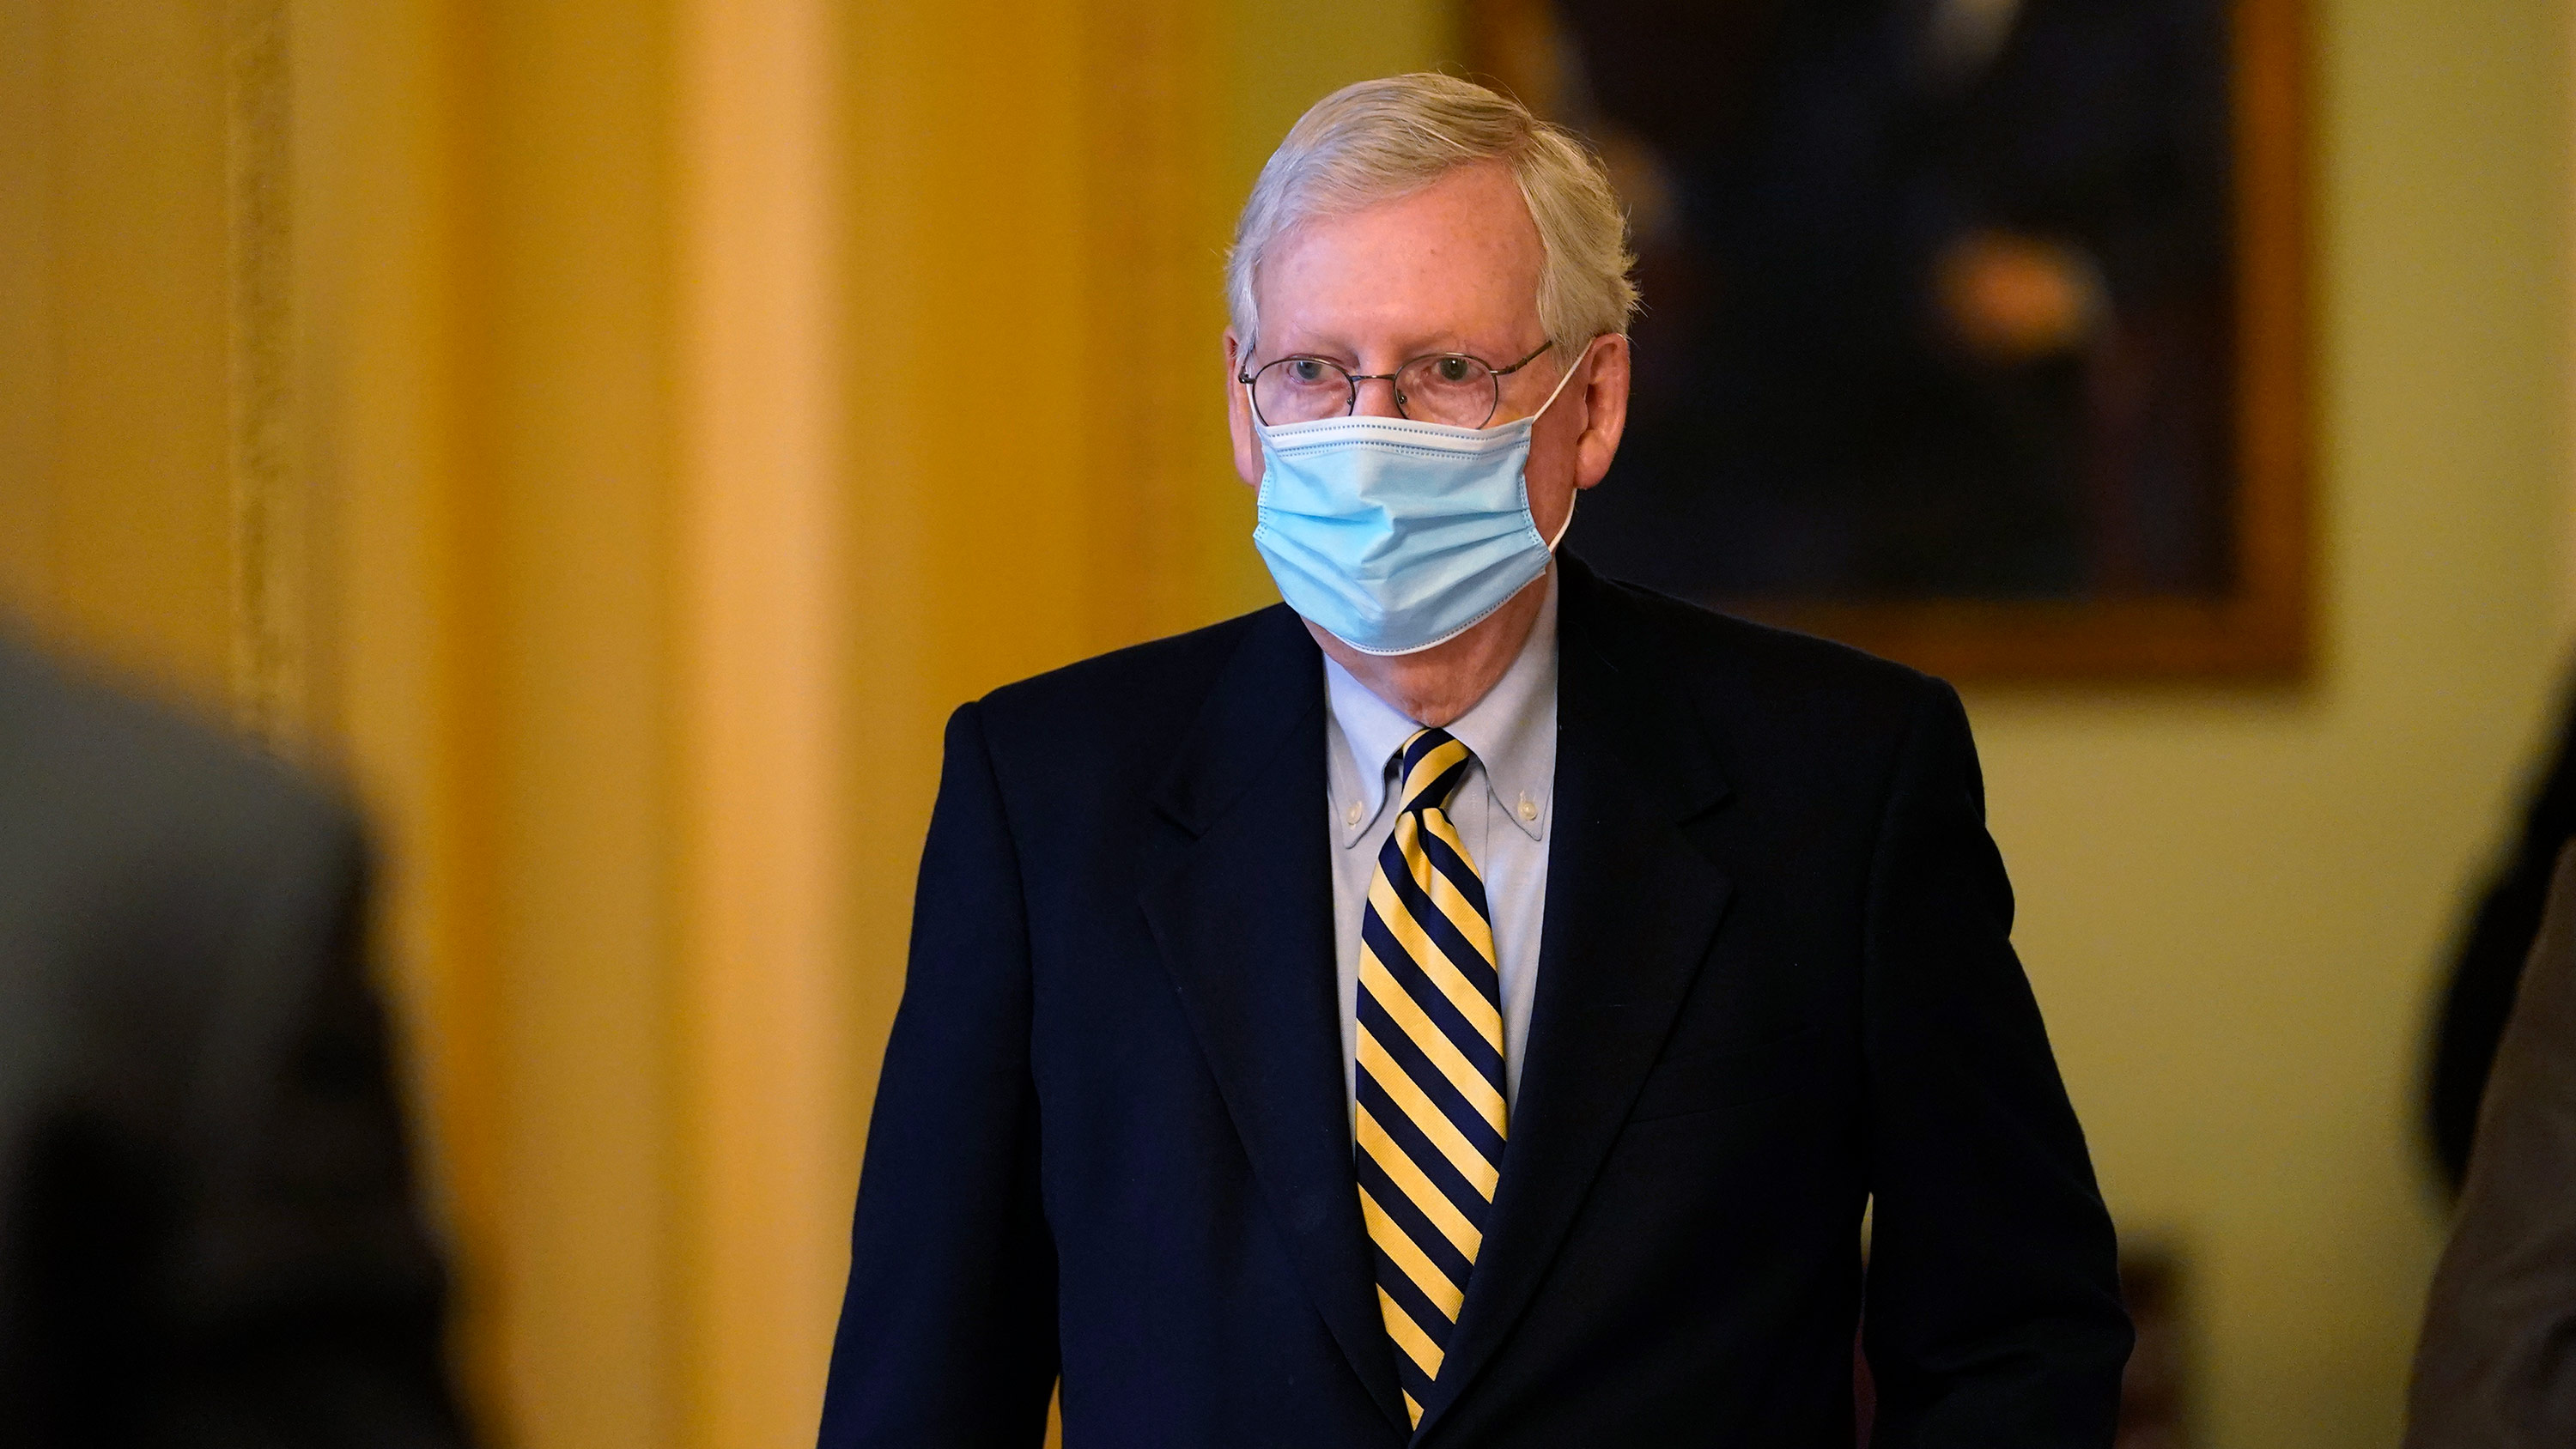 Senate Minority Leader Mitch McConnell walks through the Capitol building on Monday, January 25, in Washington, DC. 